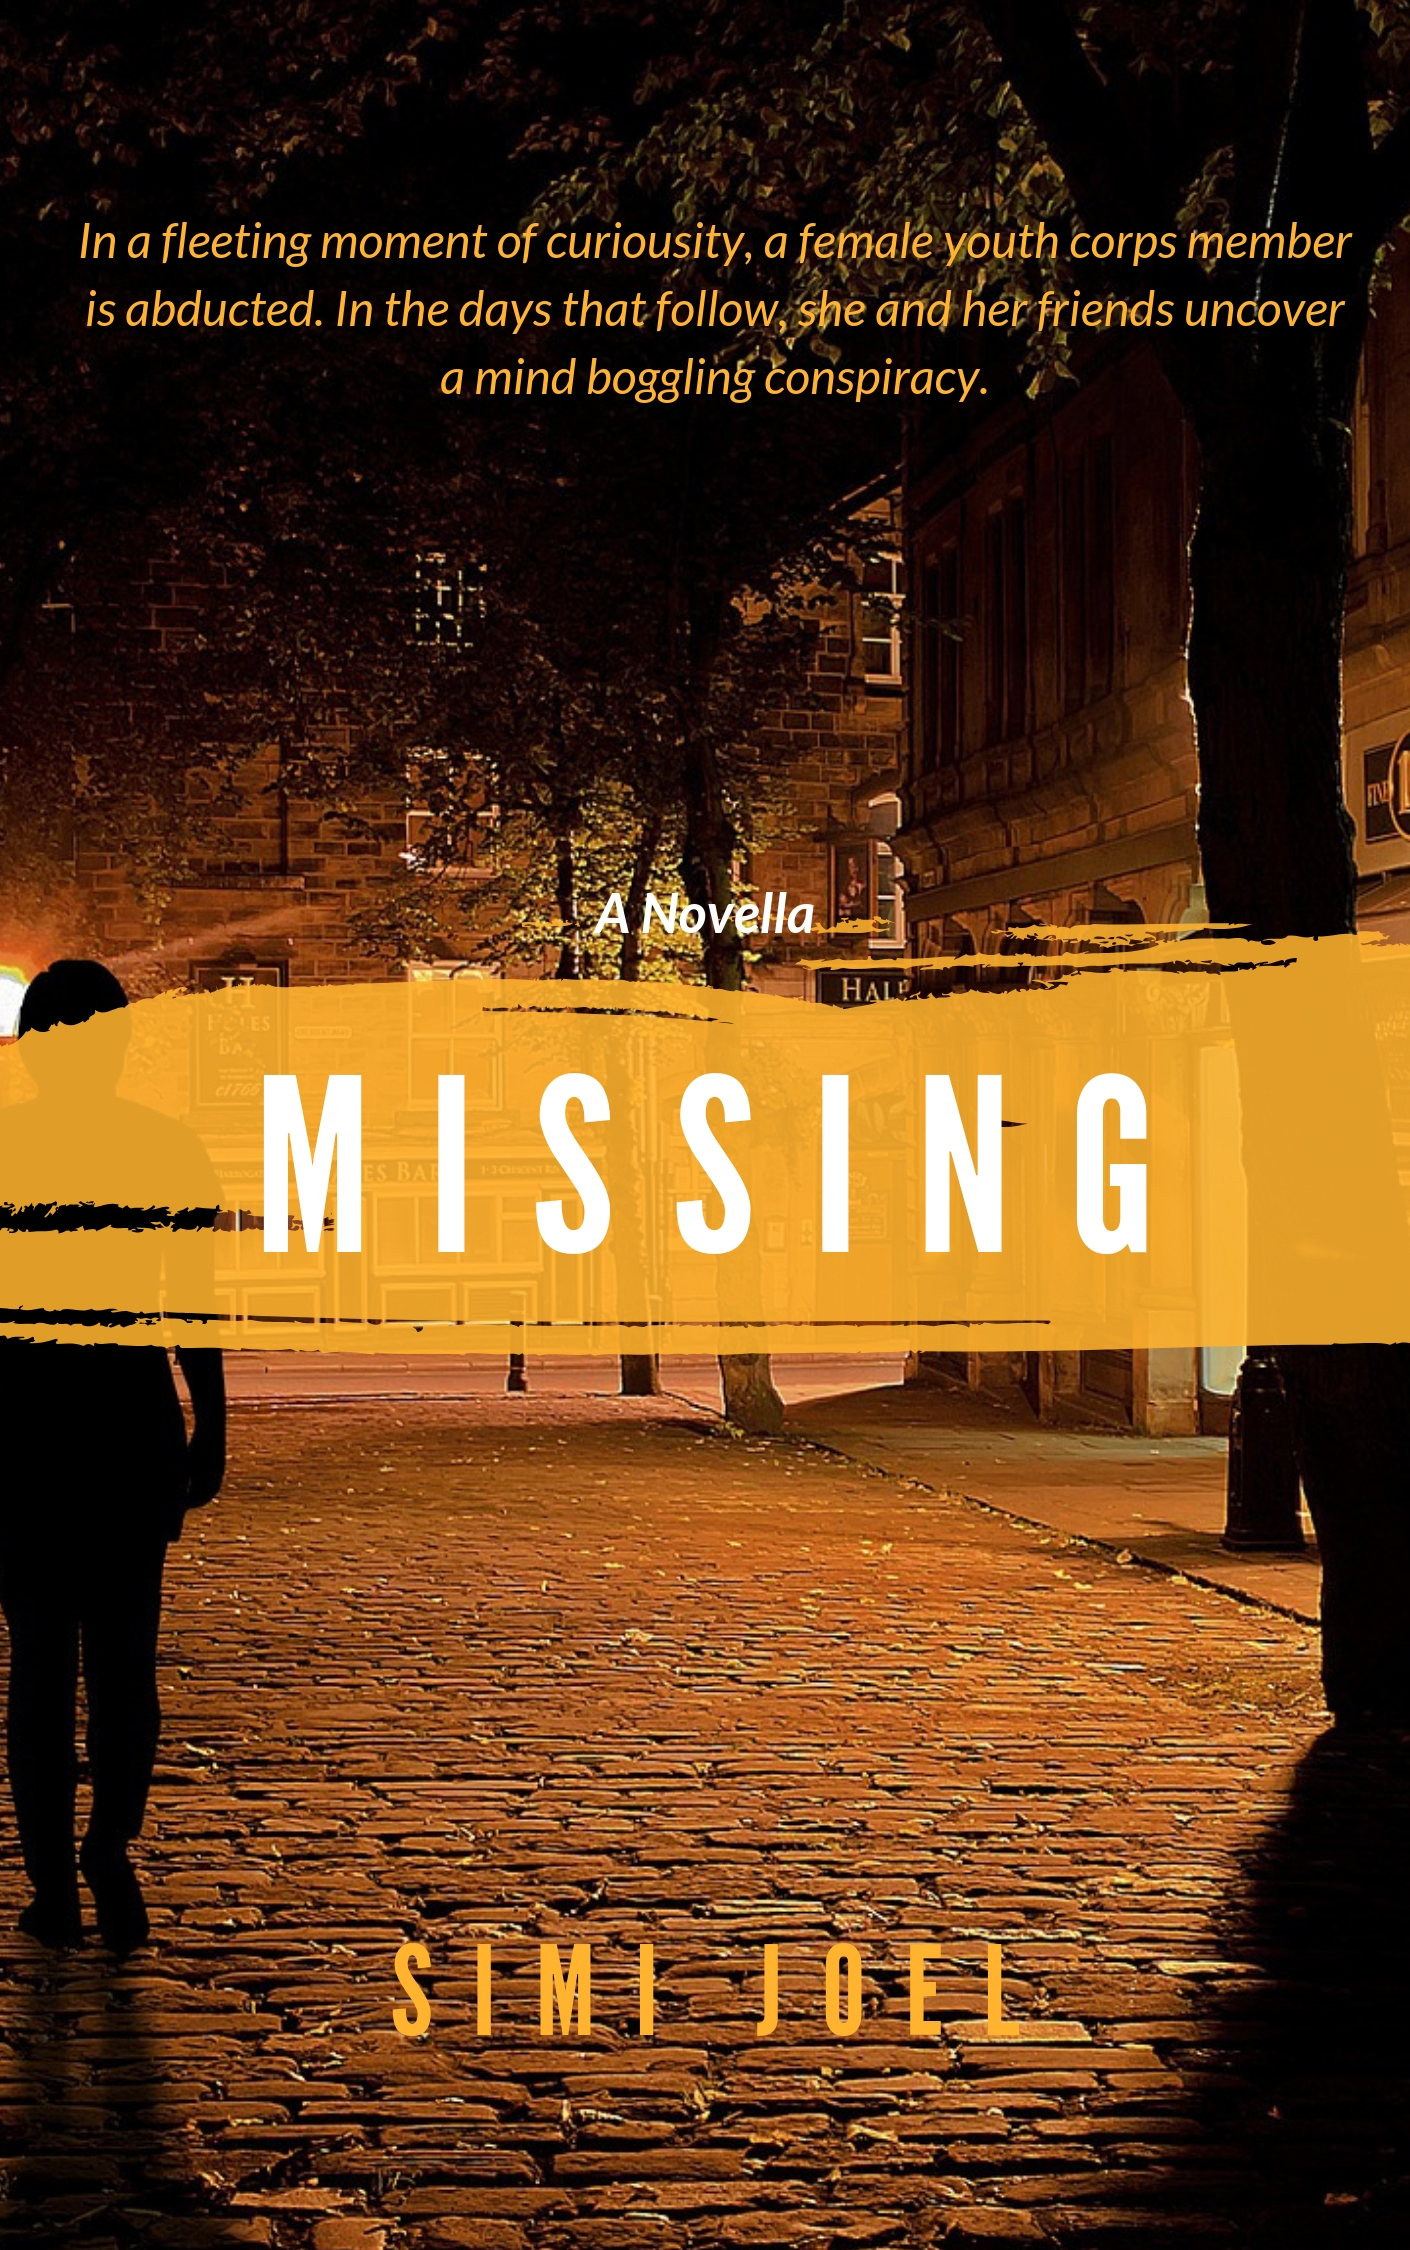 Missing---A-Short-Story-